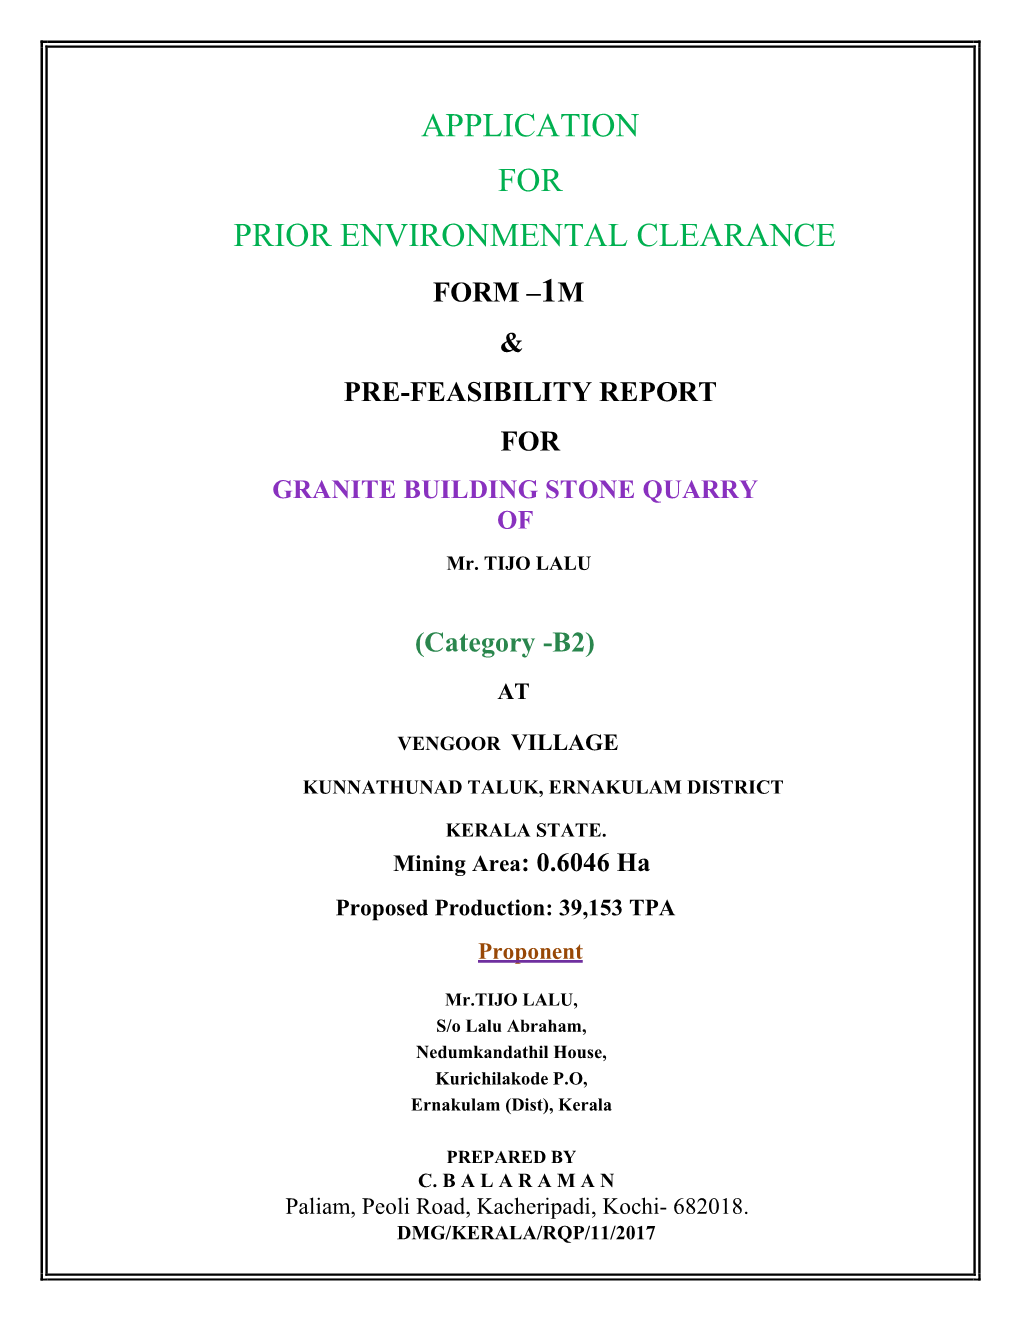 APPLICATION for PRIOR ENVIRONMENTAL CLEARANCE FORM –1M & PRE-FEASIBILITY REPORT for GRANITE BUILDING STONE QUARRY of Mr